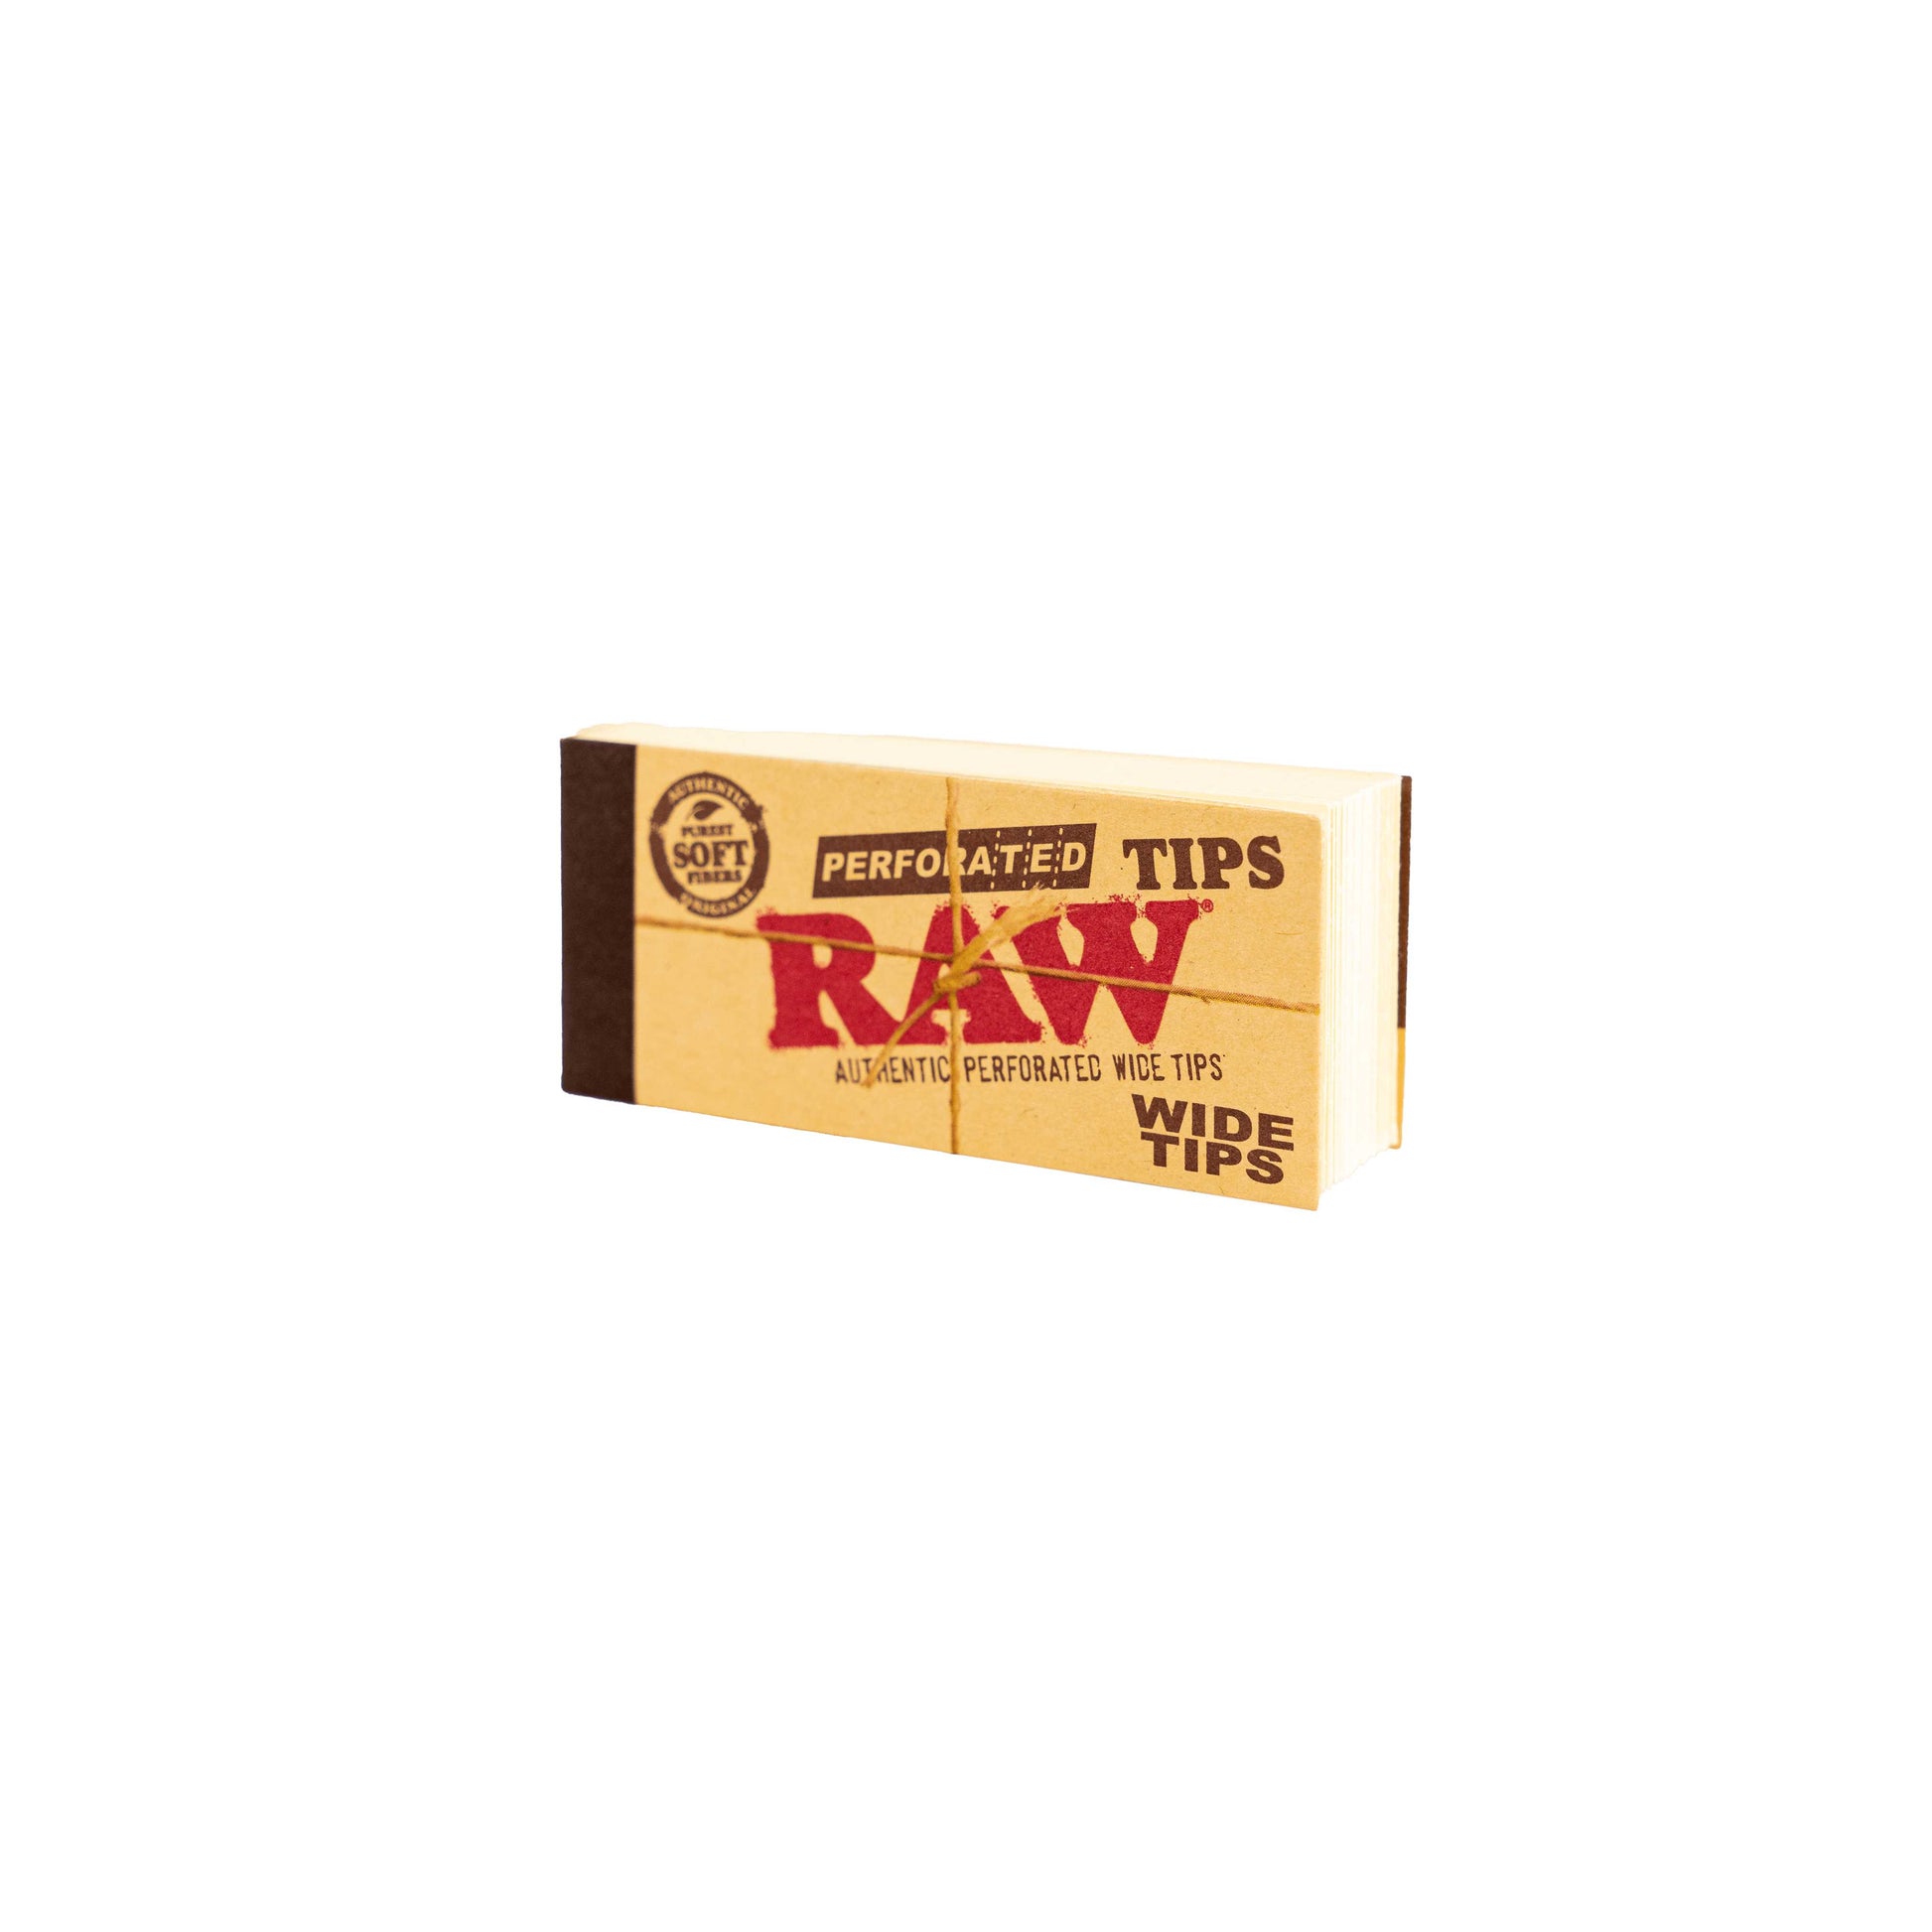 RAW Filter Tips - Perforated Wide Tips - - Filter Tips - RAW - Cali Tobacconist